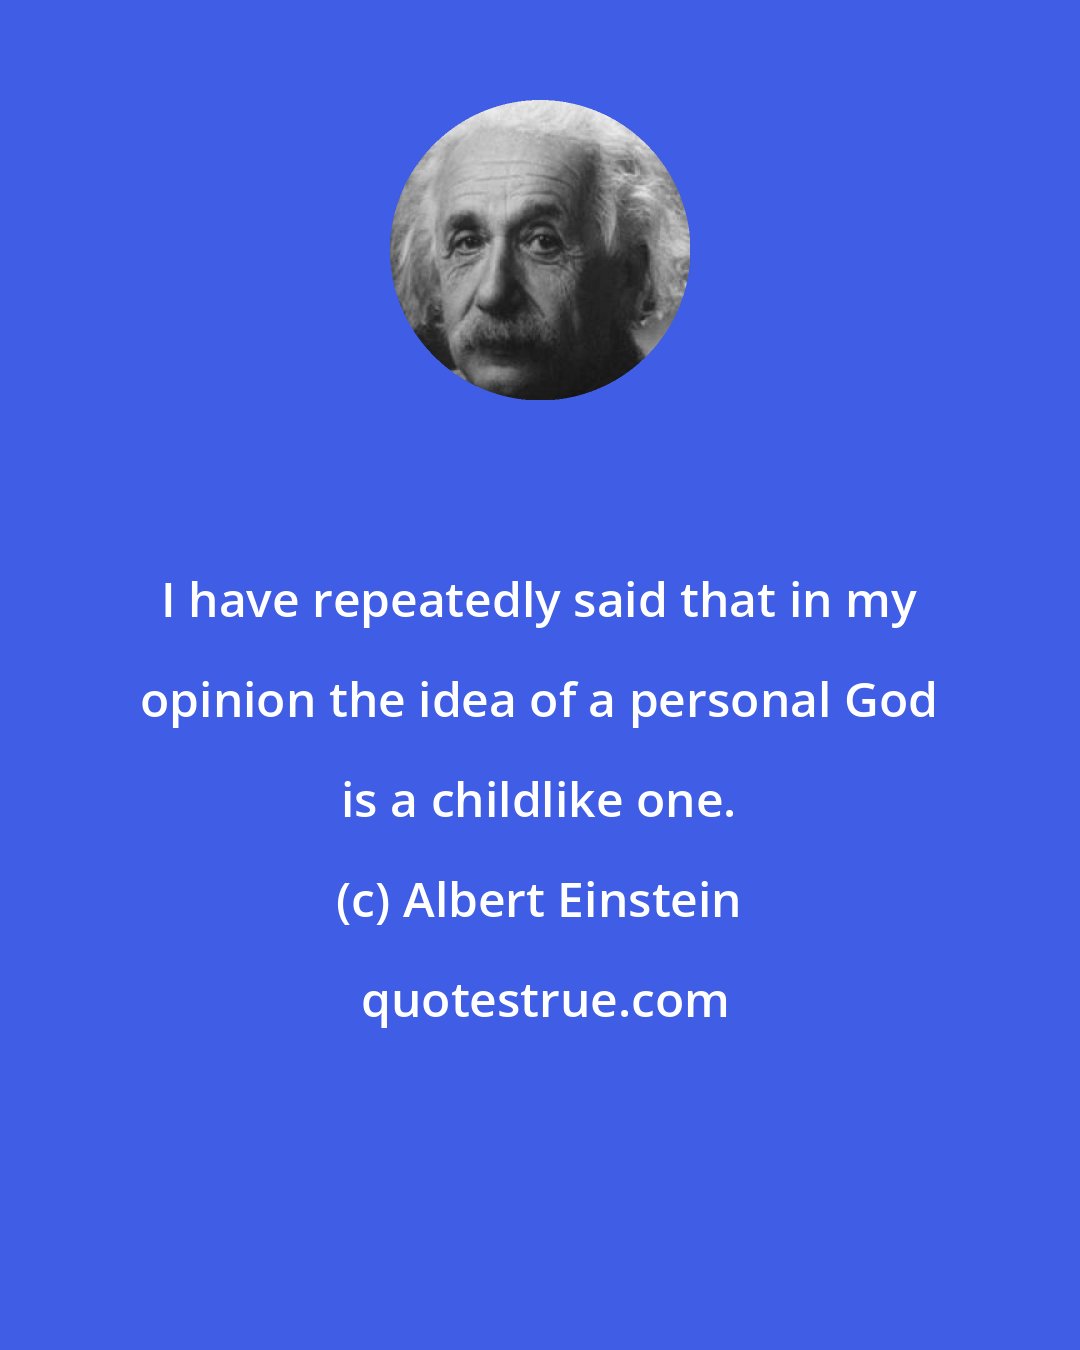 Albert Einstein: I have repeatedly said that in my opinion the idea of a personal God is a childlike one.